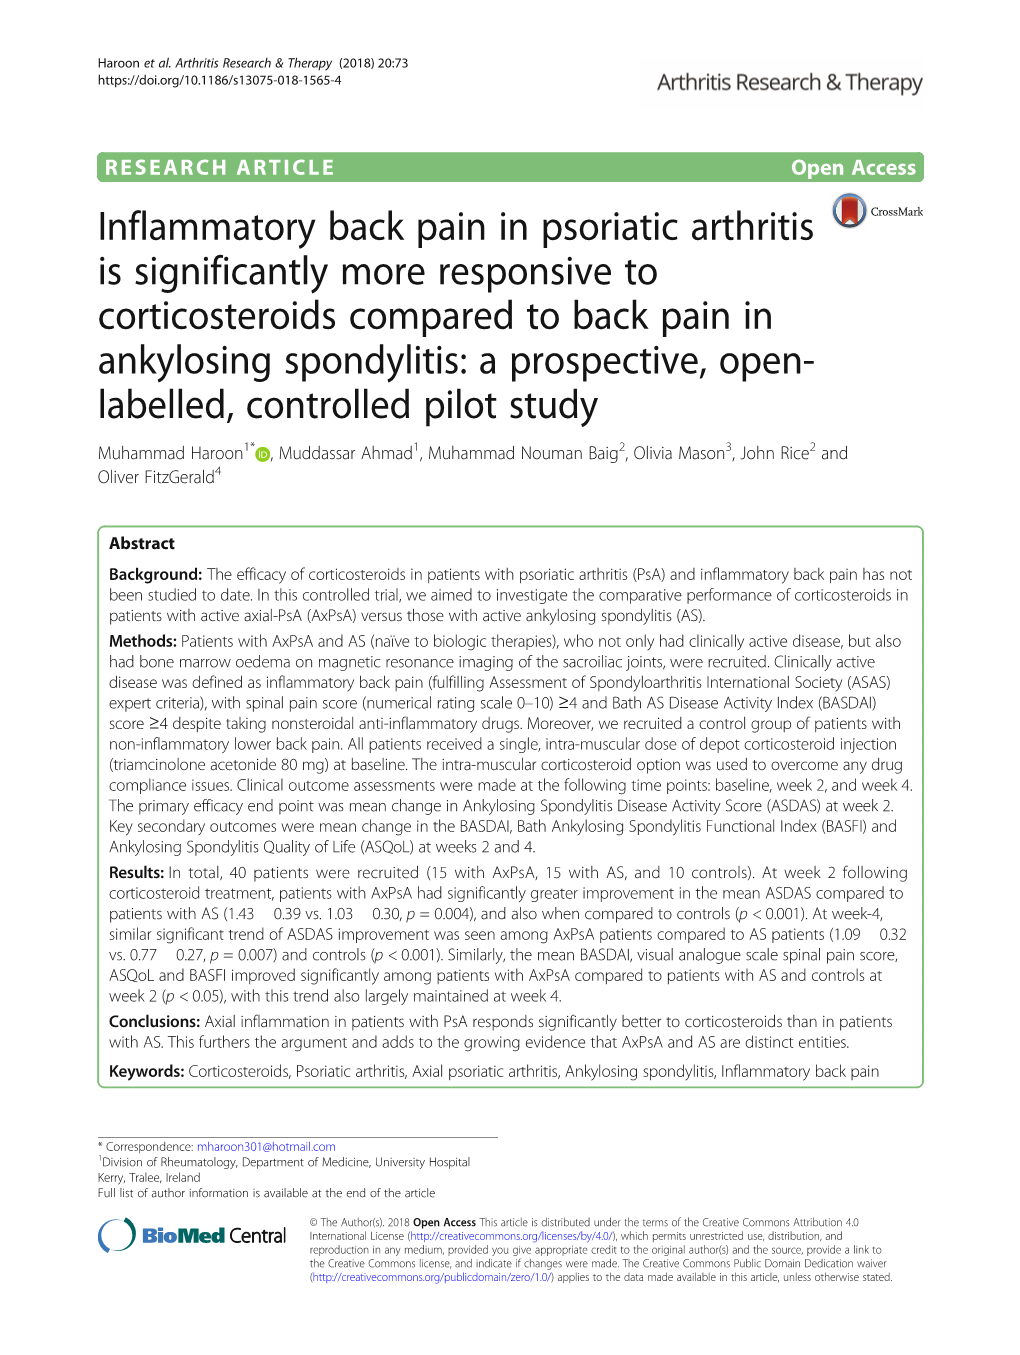 Inflammatory Back Pain in Psoriatic Arthritis Is Significantly More